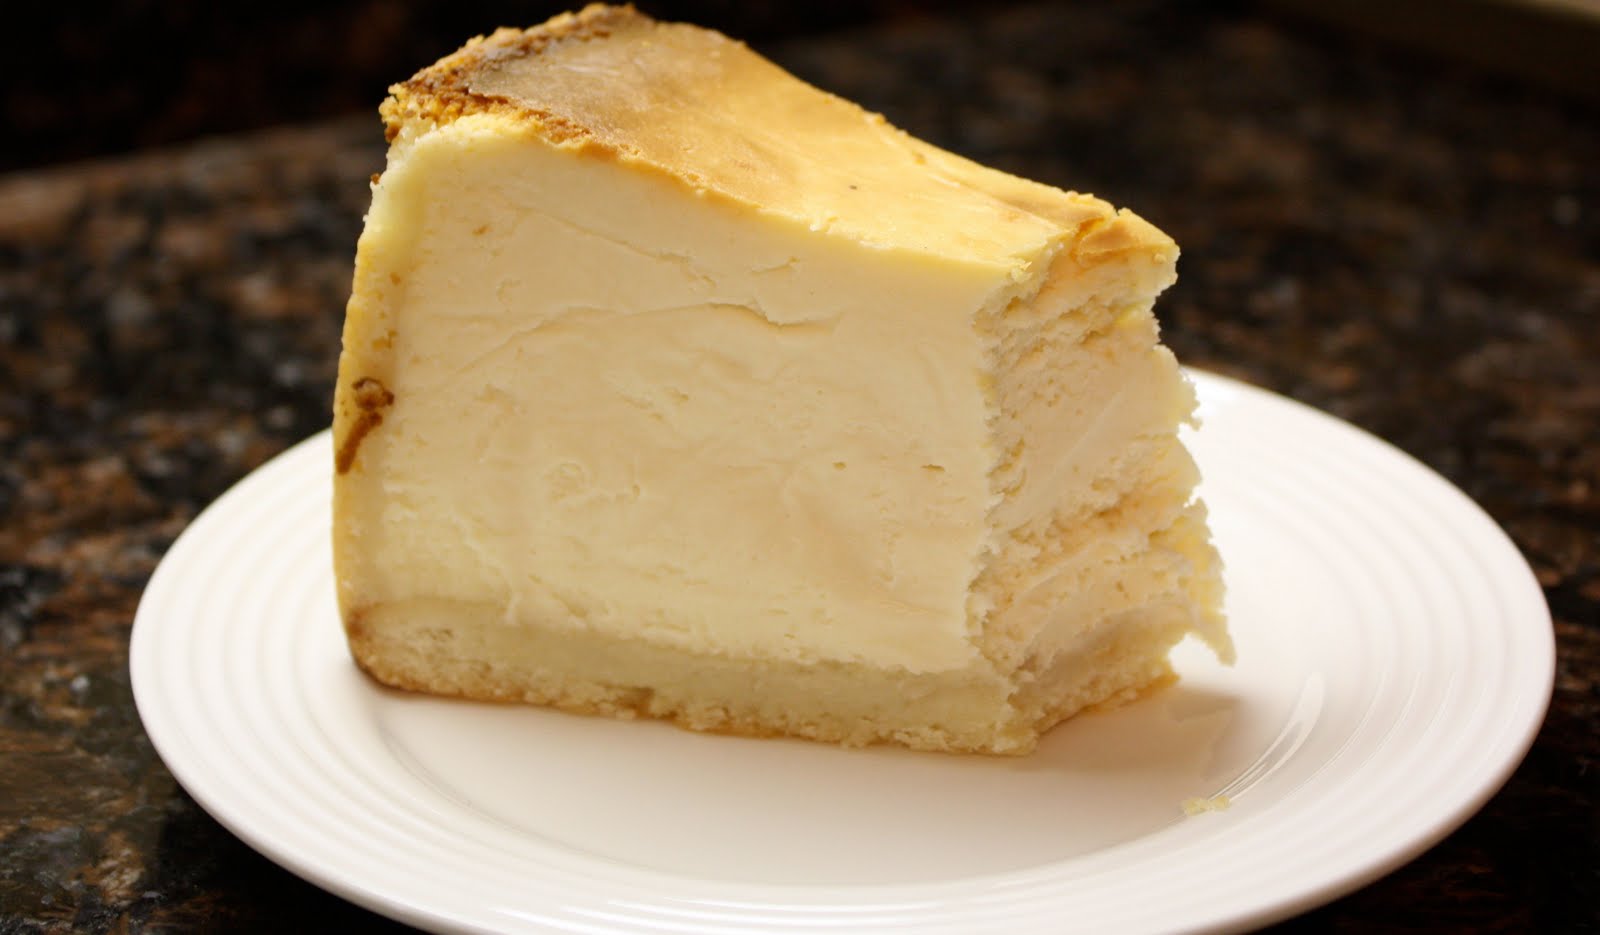 soulful college girl.: The Perfect Cheesecake, Part I